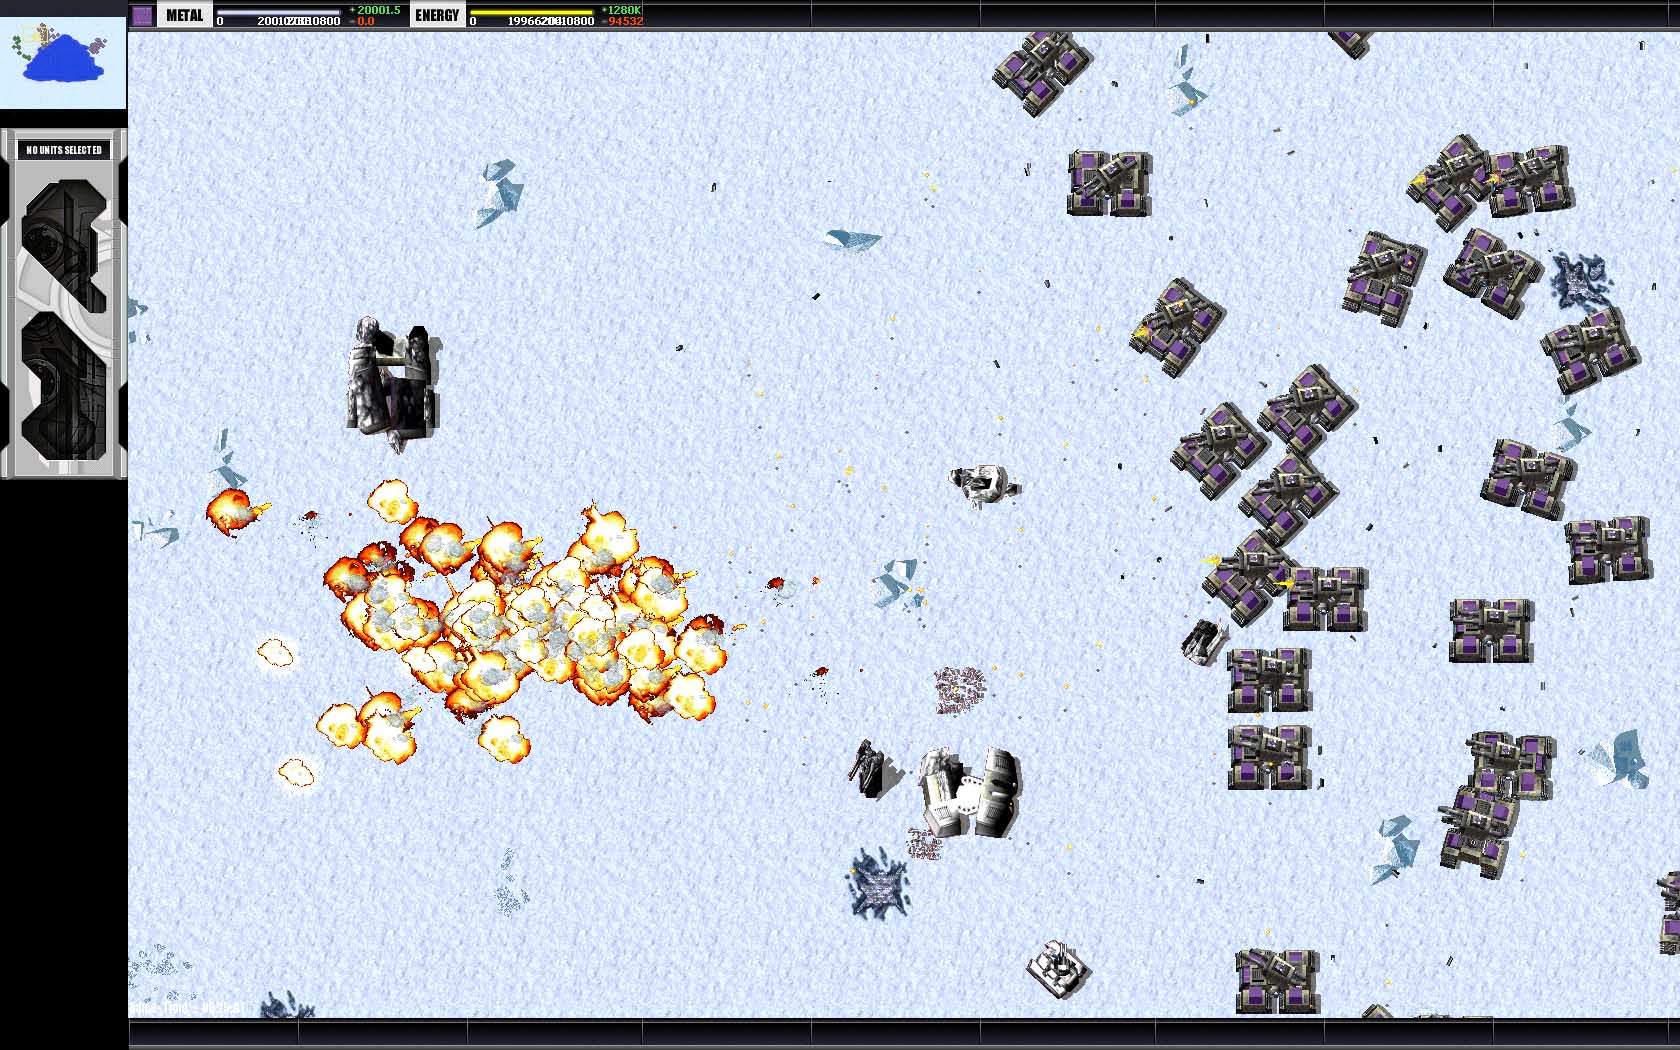 An overhead shot of several tanks blowing up an enemy unit on a snowy landscape in Total Annihilation